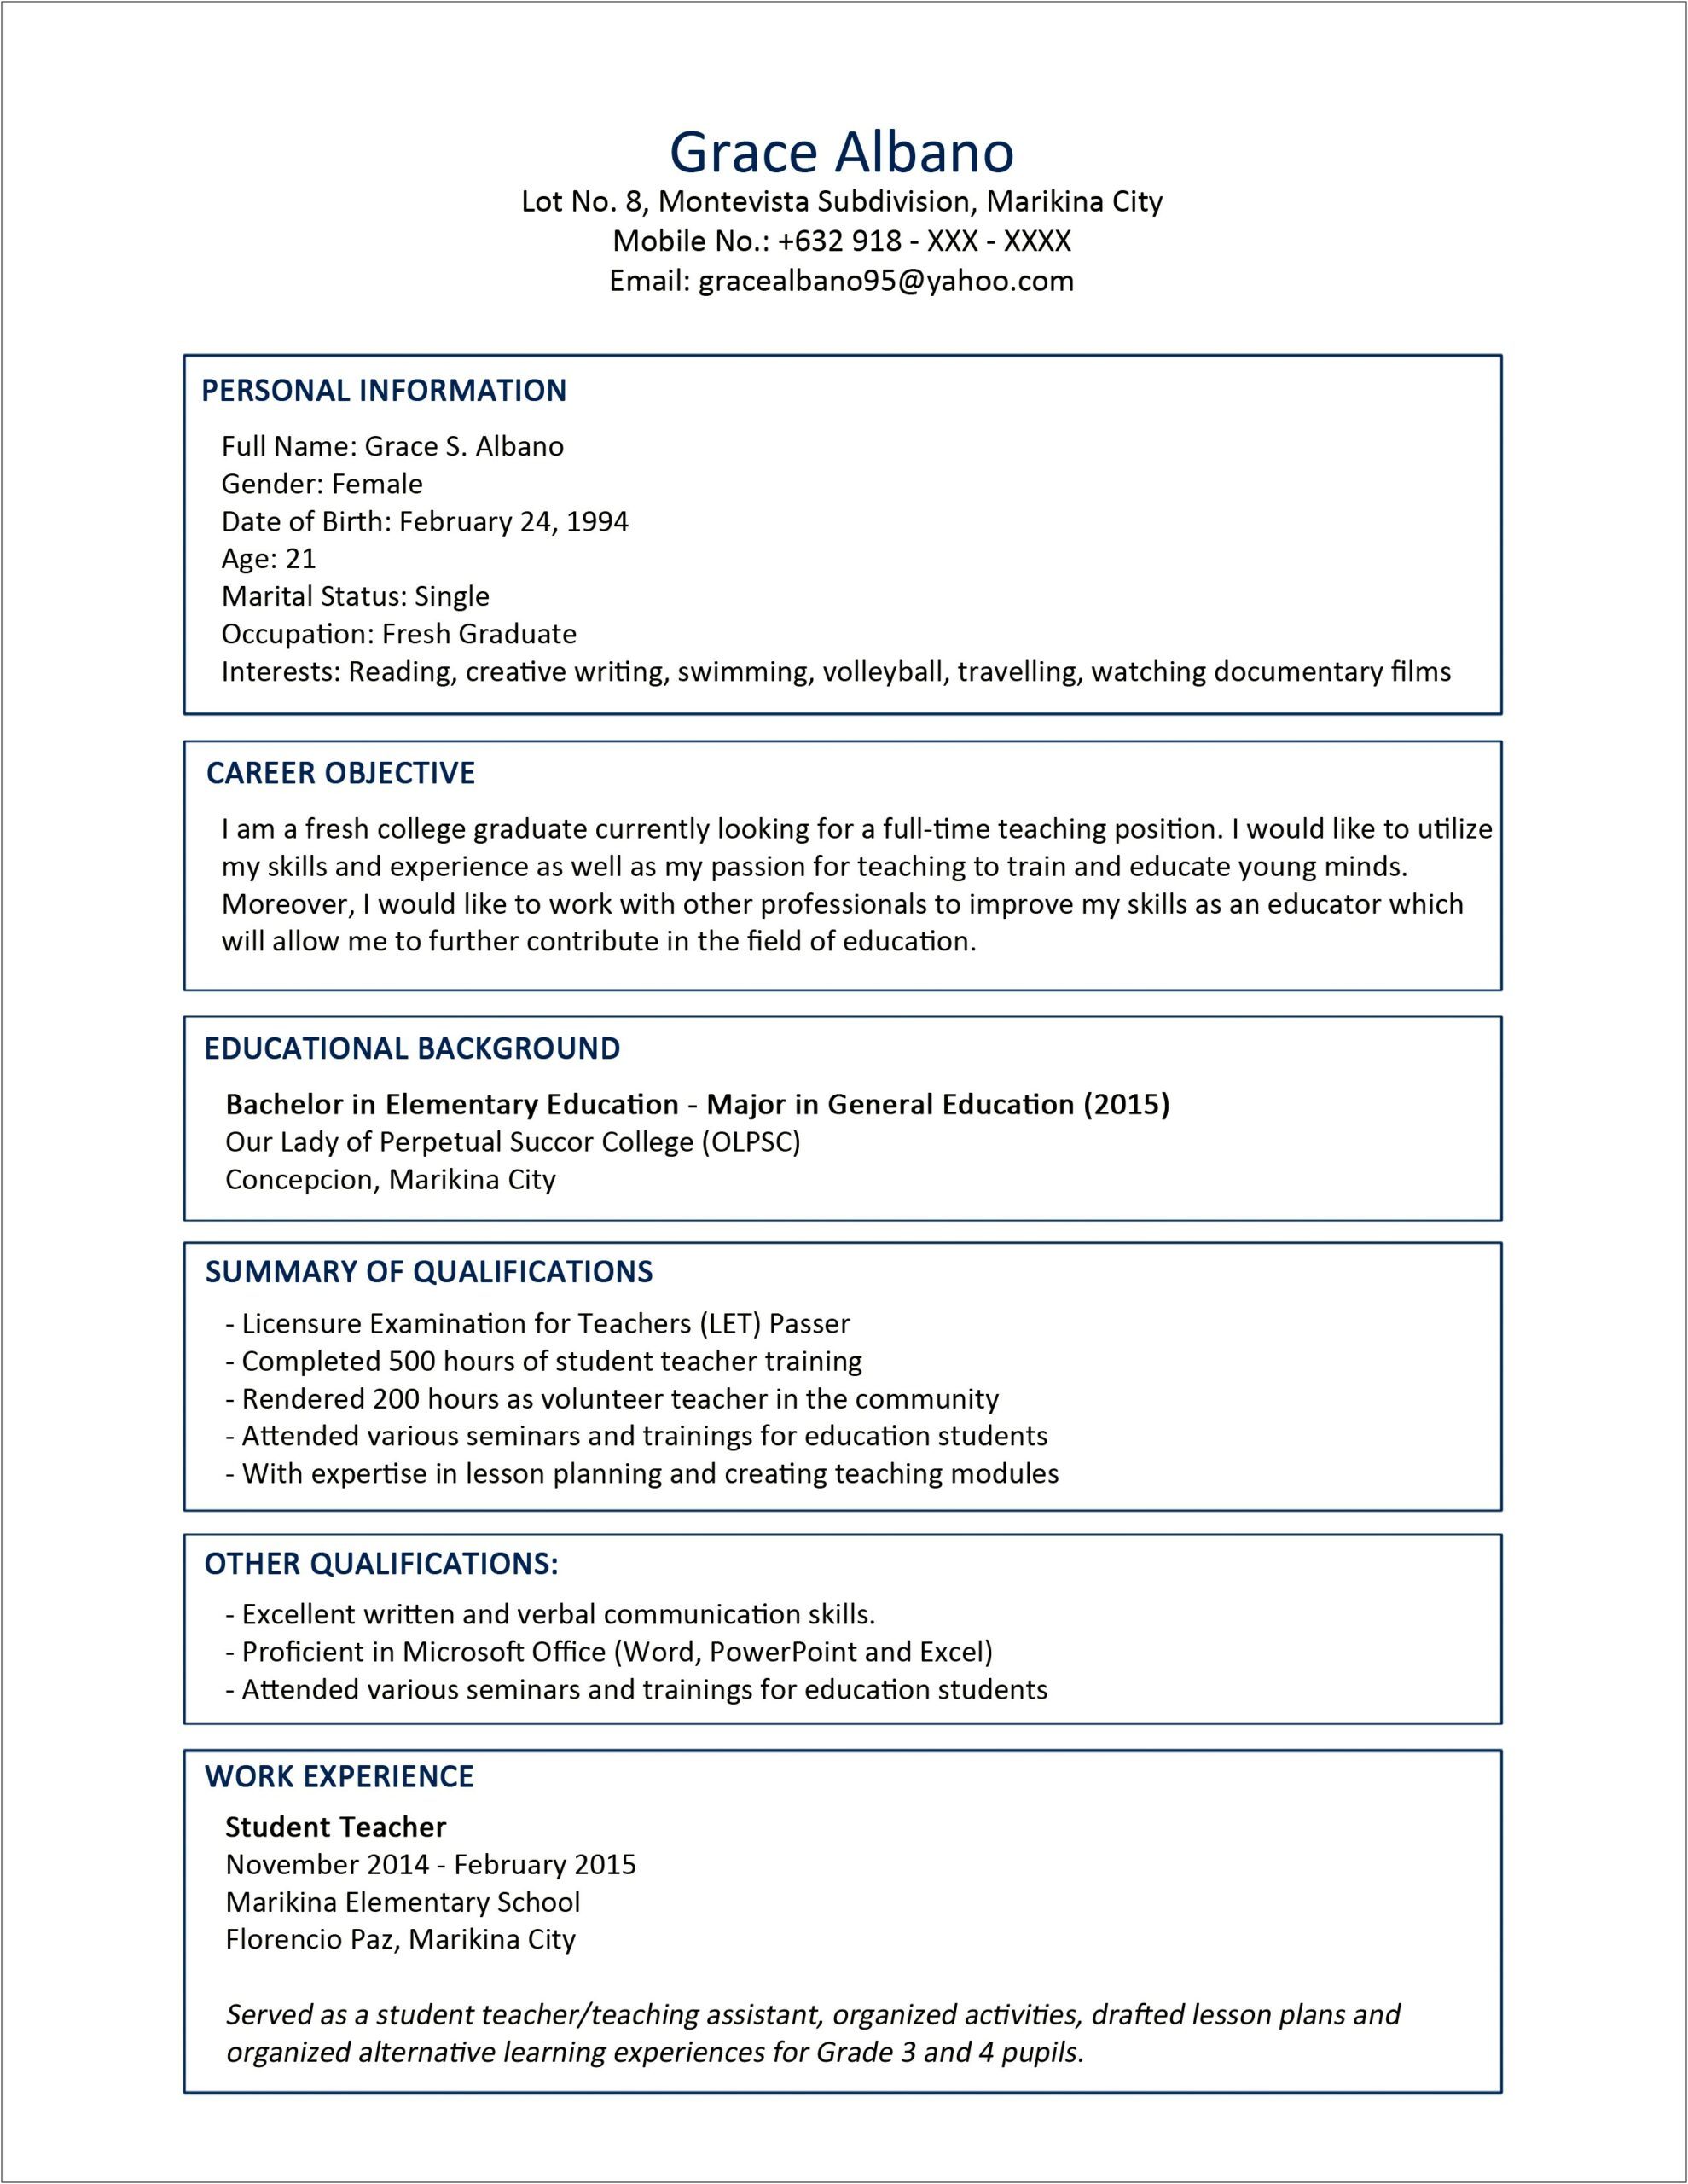 Fresh Out Of College Resume Summary